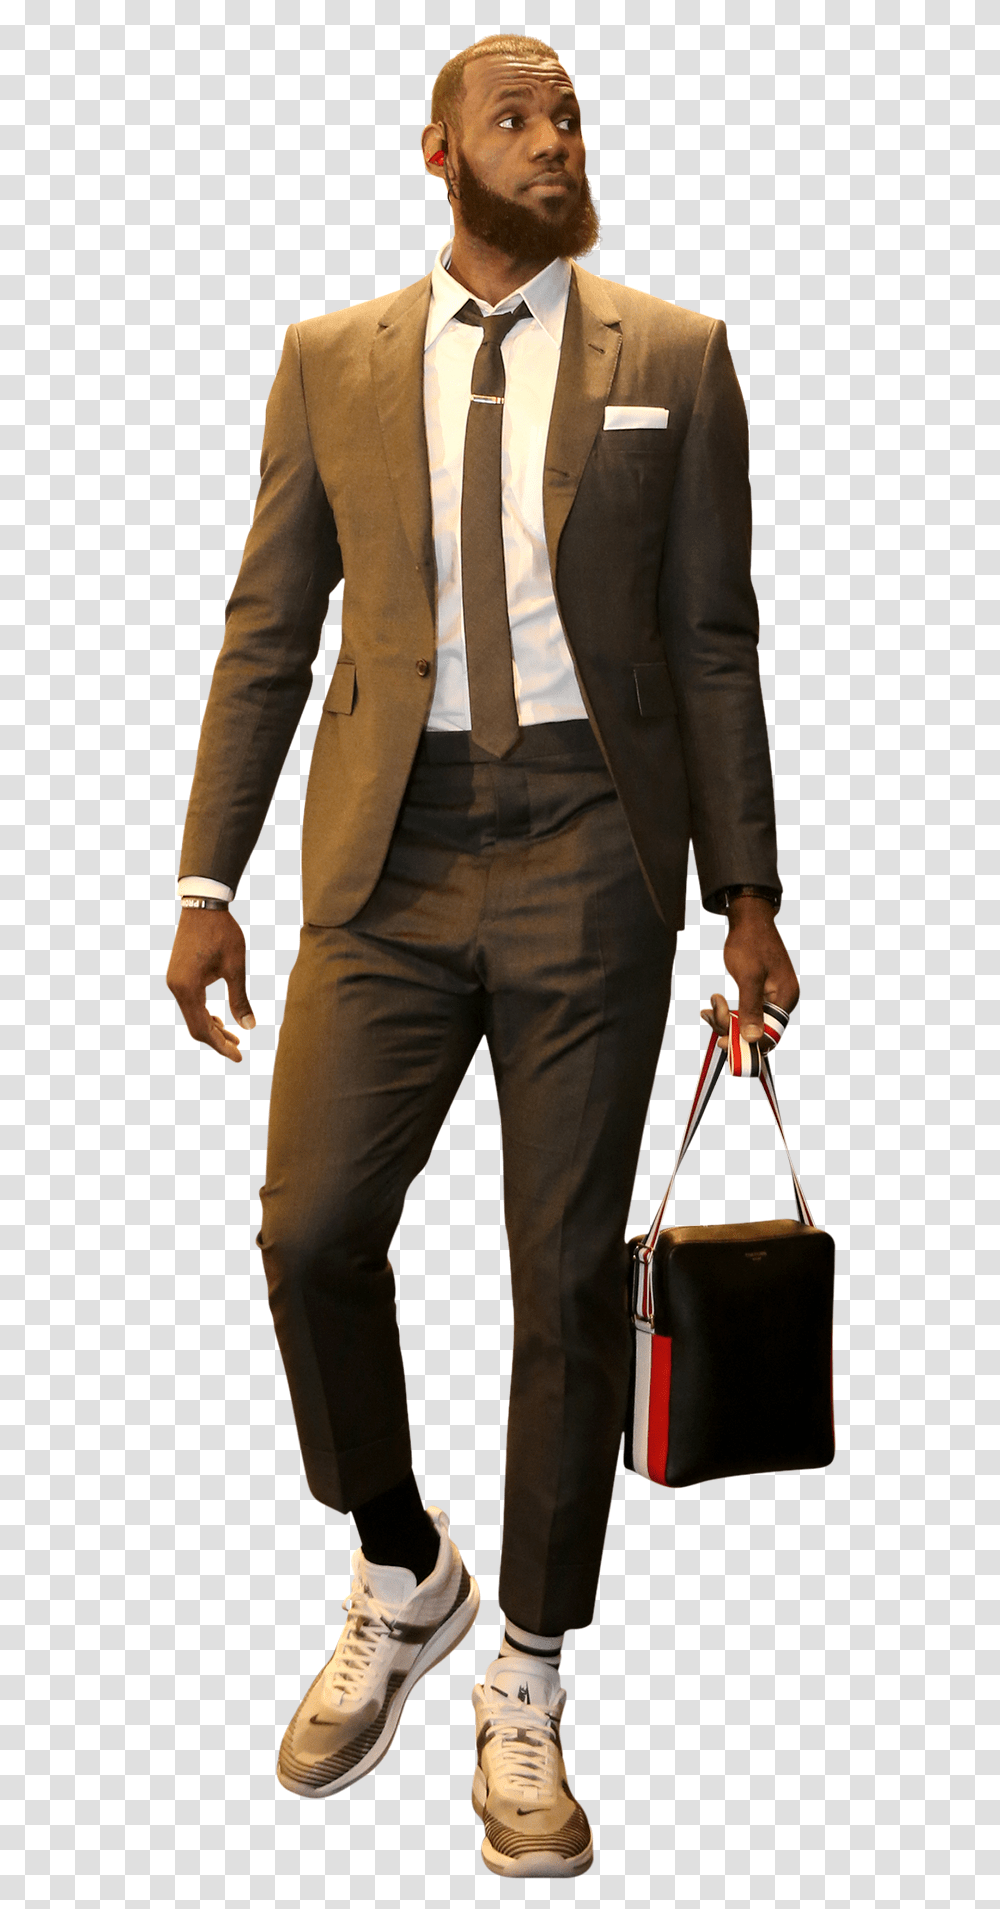 Lebron James In A Brown Suit, Overcoat, Tie, Accessories Transparent Png